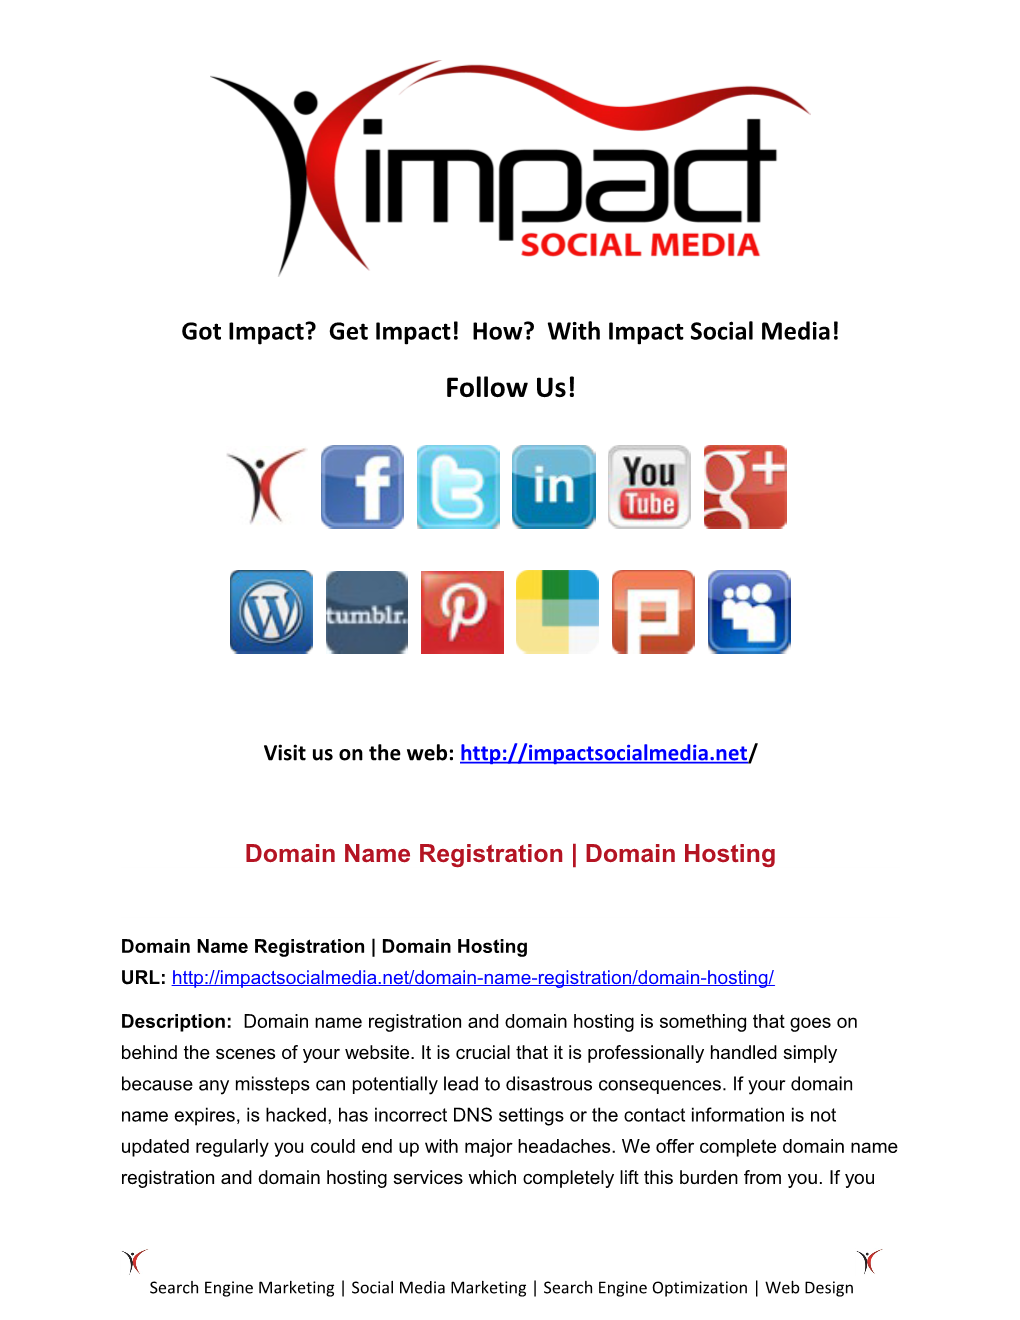 Got Impact? Get Impact! How? with Impact Social Media!